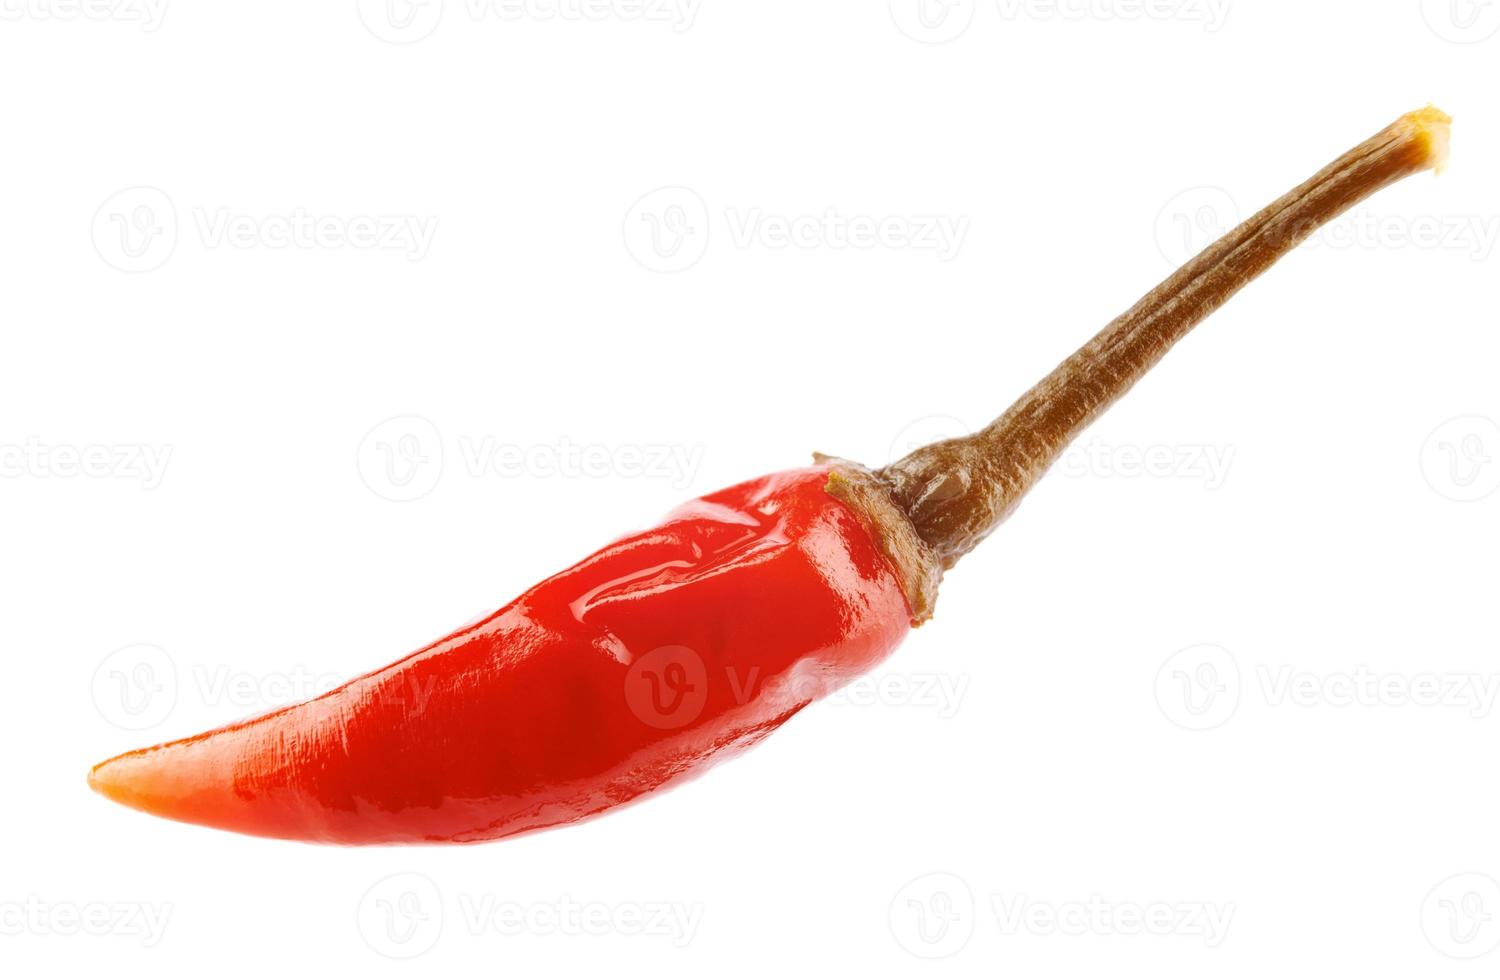 Pickled chili pepper isolated on white background. Full clipping path. photo